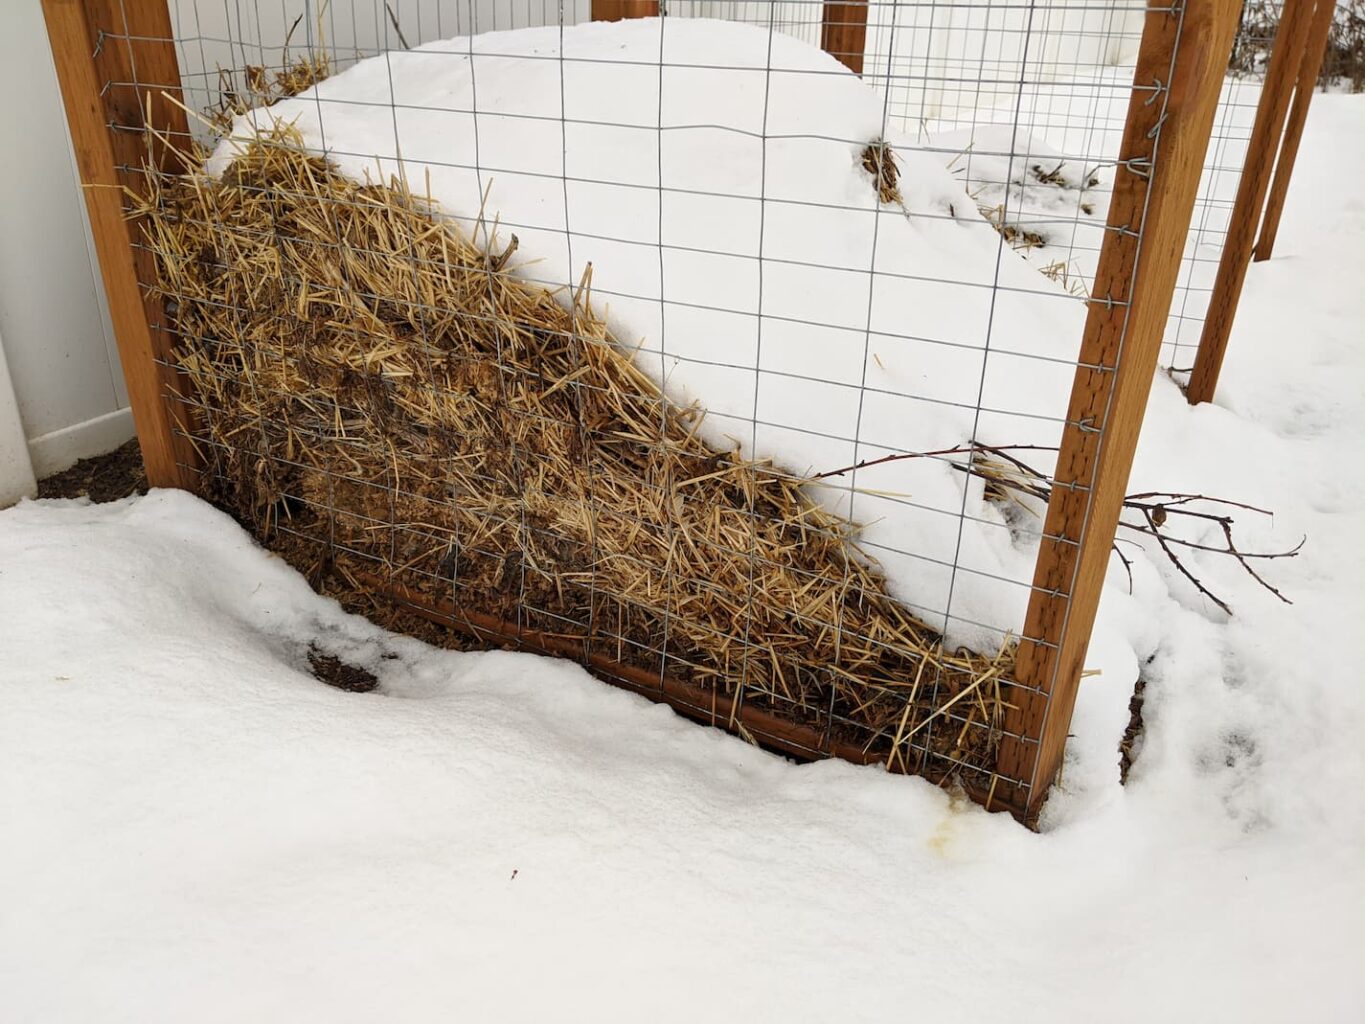 An image of our compost pile in the winter covered in snow.